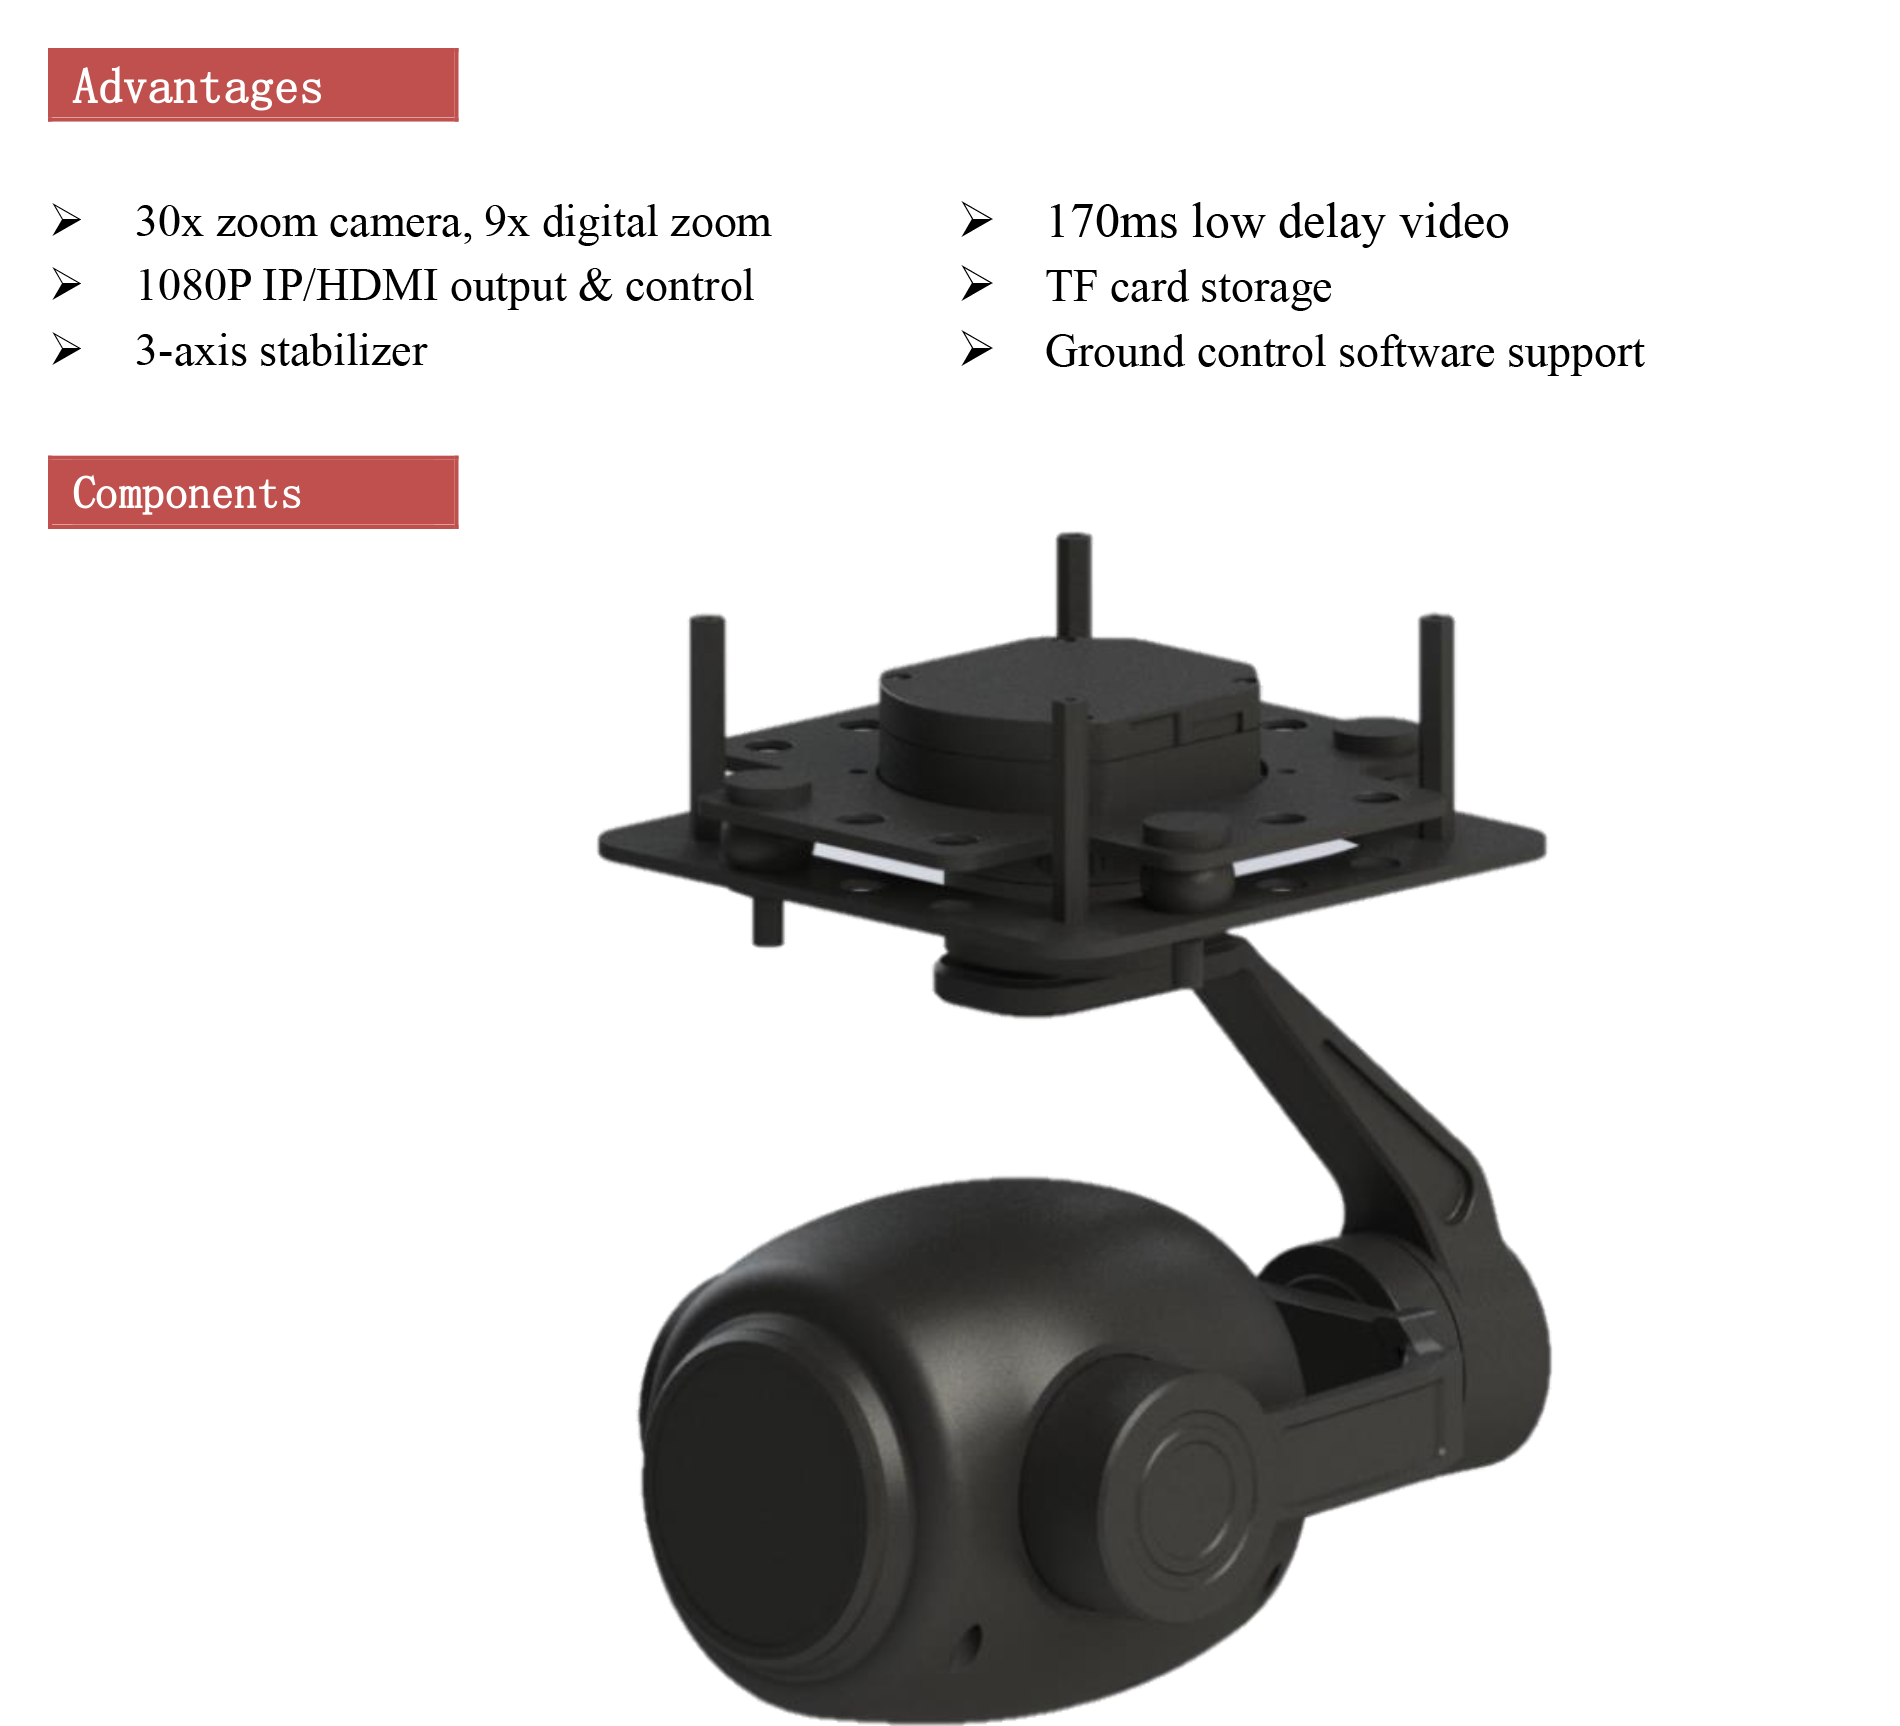 TOPOTEK KHP30S90 Drone Camera Gimbal, High-zoom camera with 3-axis stabilization for smooth video and stills capture.